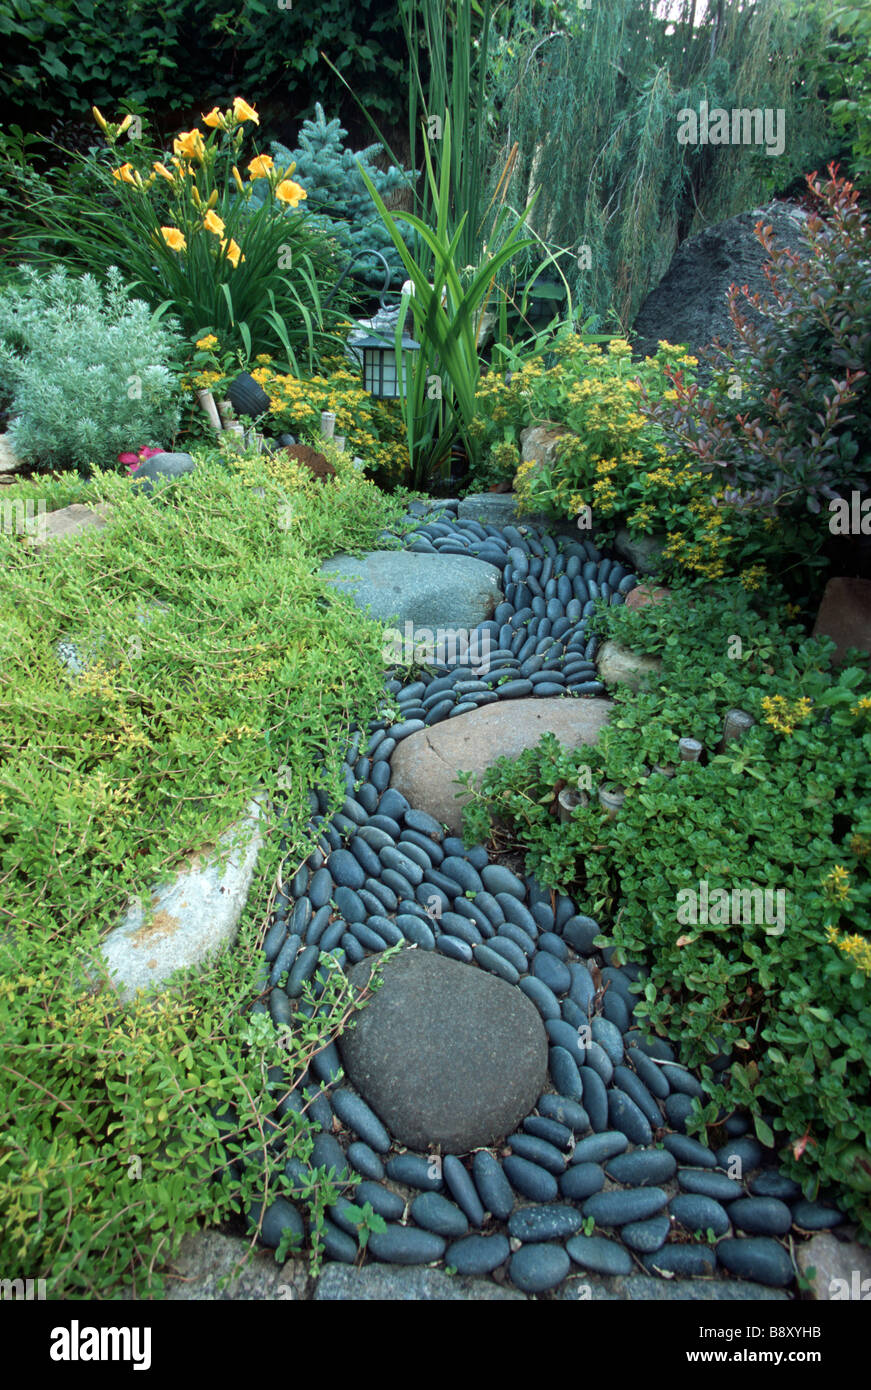 DRY STREAM OF MEXICAN BEACH PEPPLES CURVES THROUGH GROUND COVERS IN MINNESOTA GARDEN.  SUMMER. Stock Photo